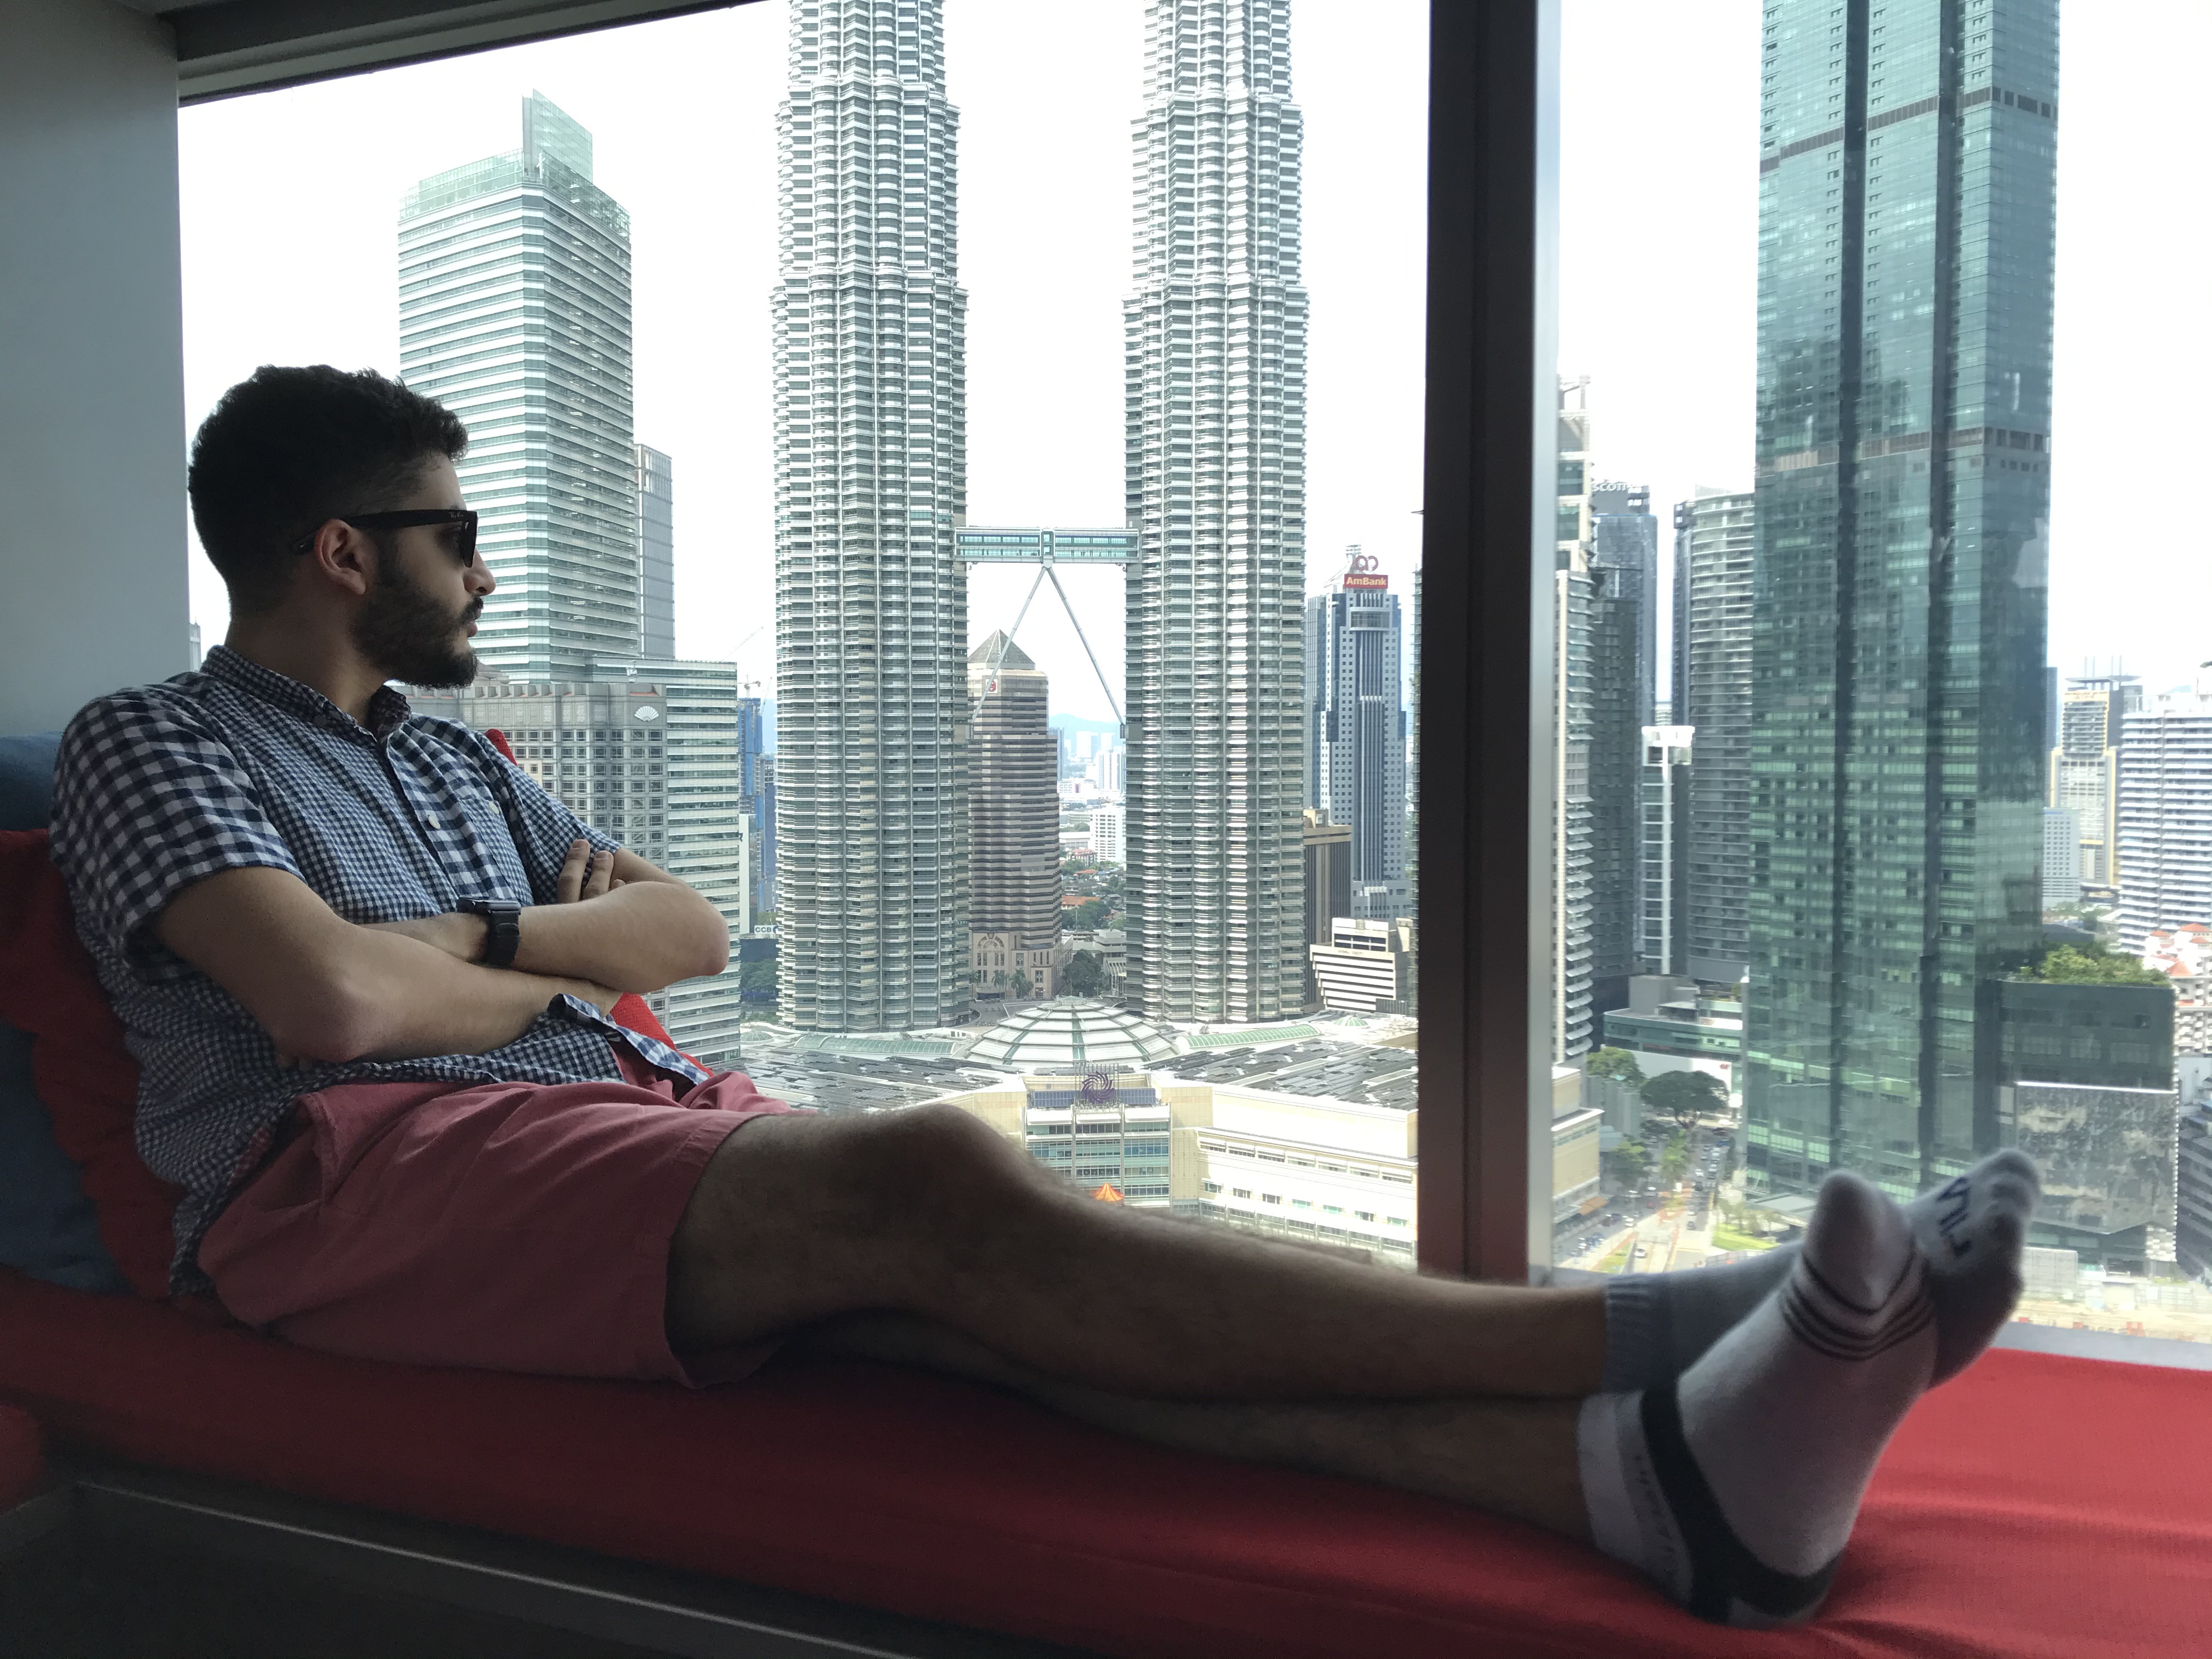 Me looking at the twin towers in Kuala Lumpur, December 2019